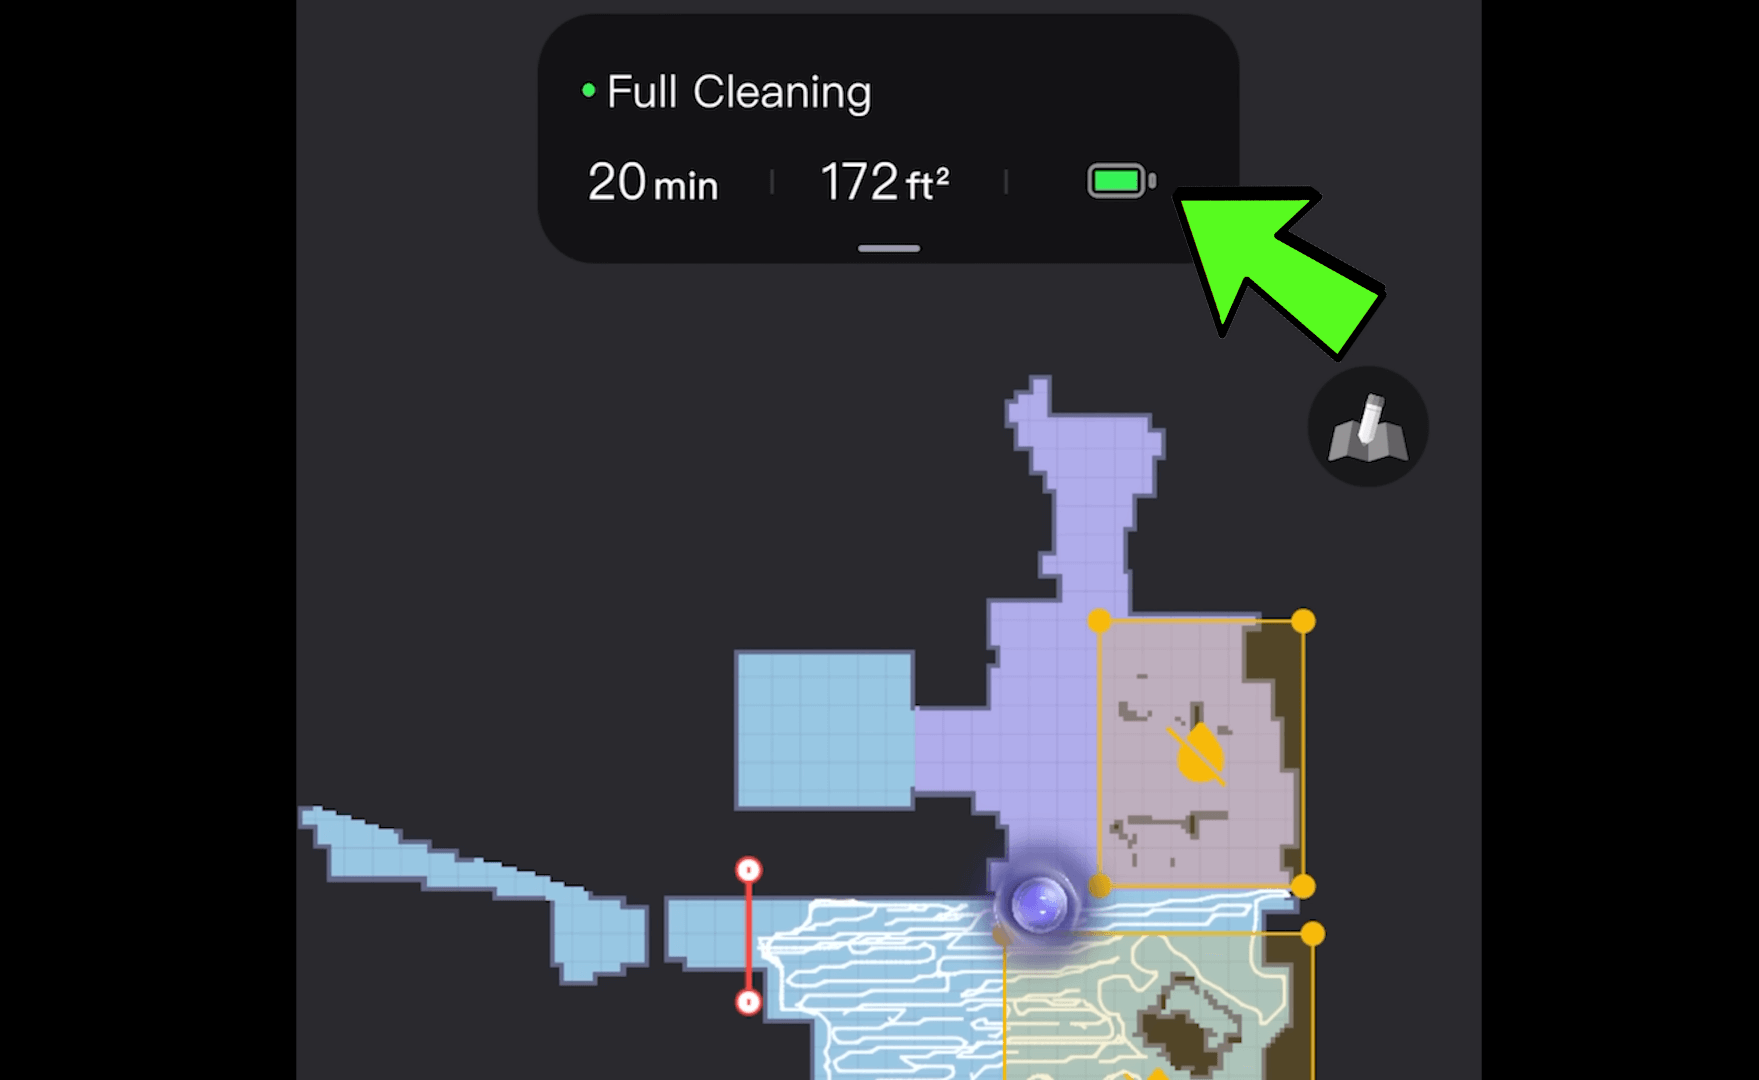 A screenshot from the Eureka E10S robot vacuum's app shows a detailed map of an area with a indication of the battery level